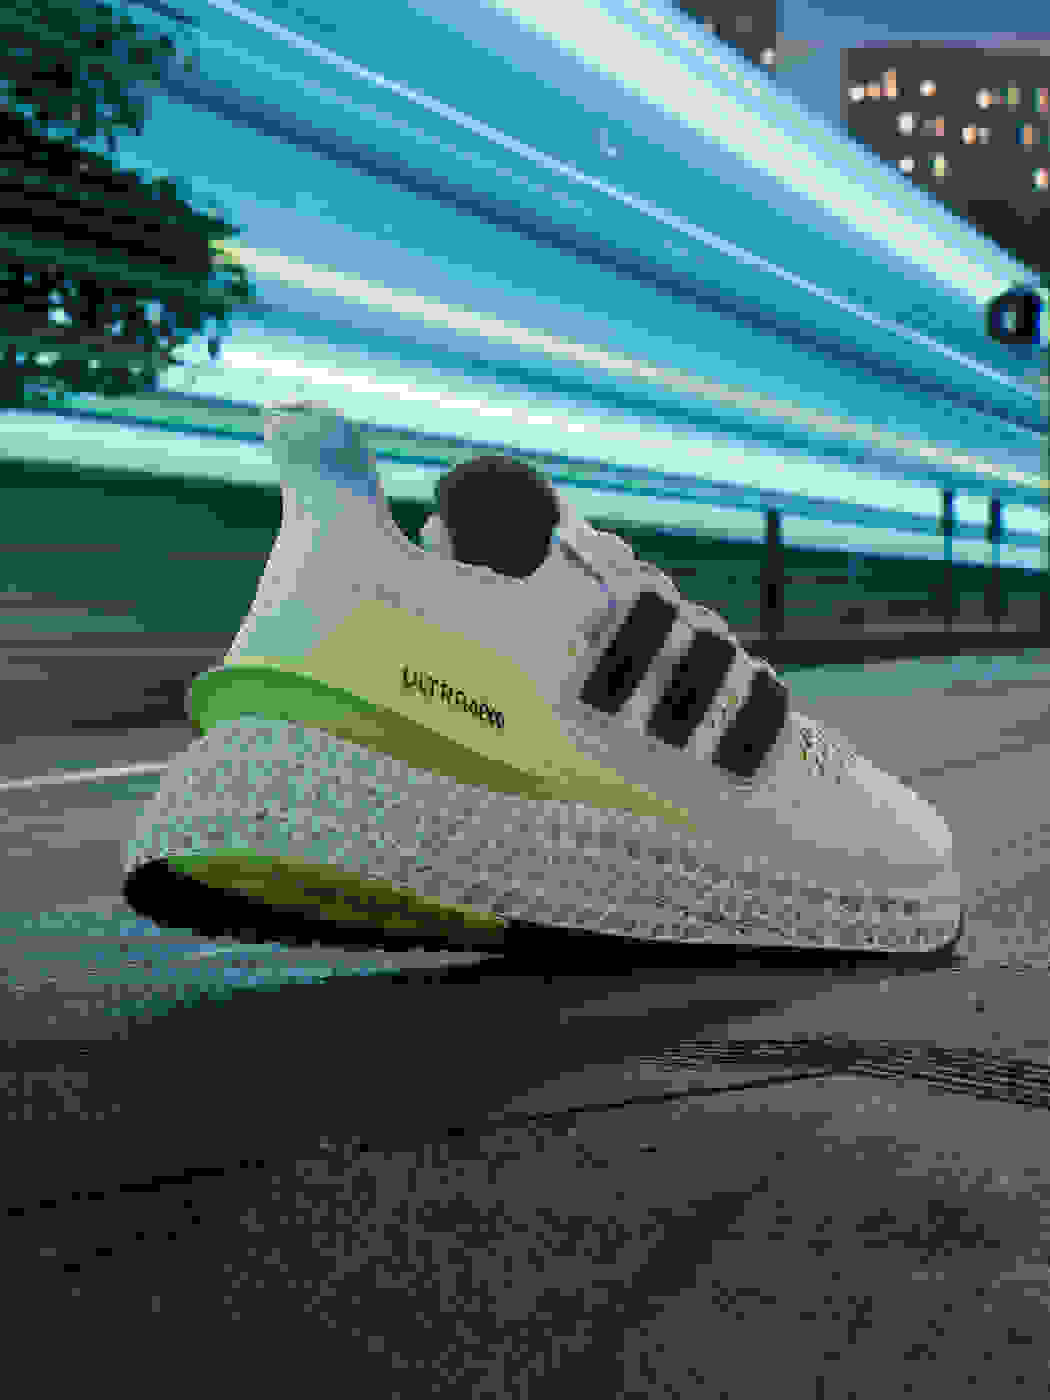 A yellow and white men's running shoe moves forward in an urban environment.